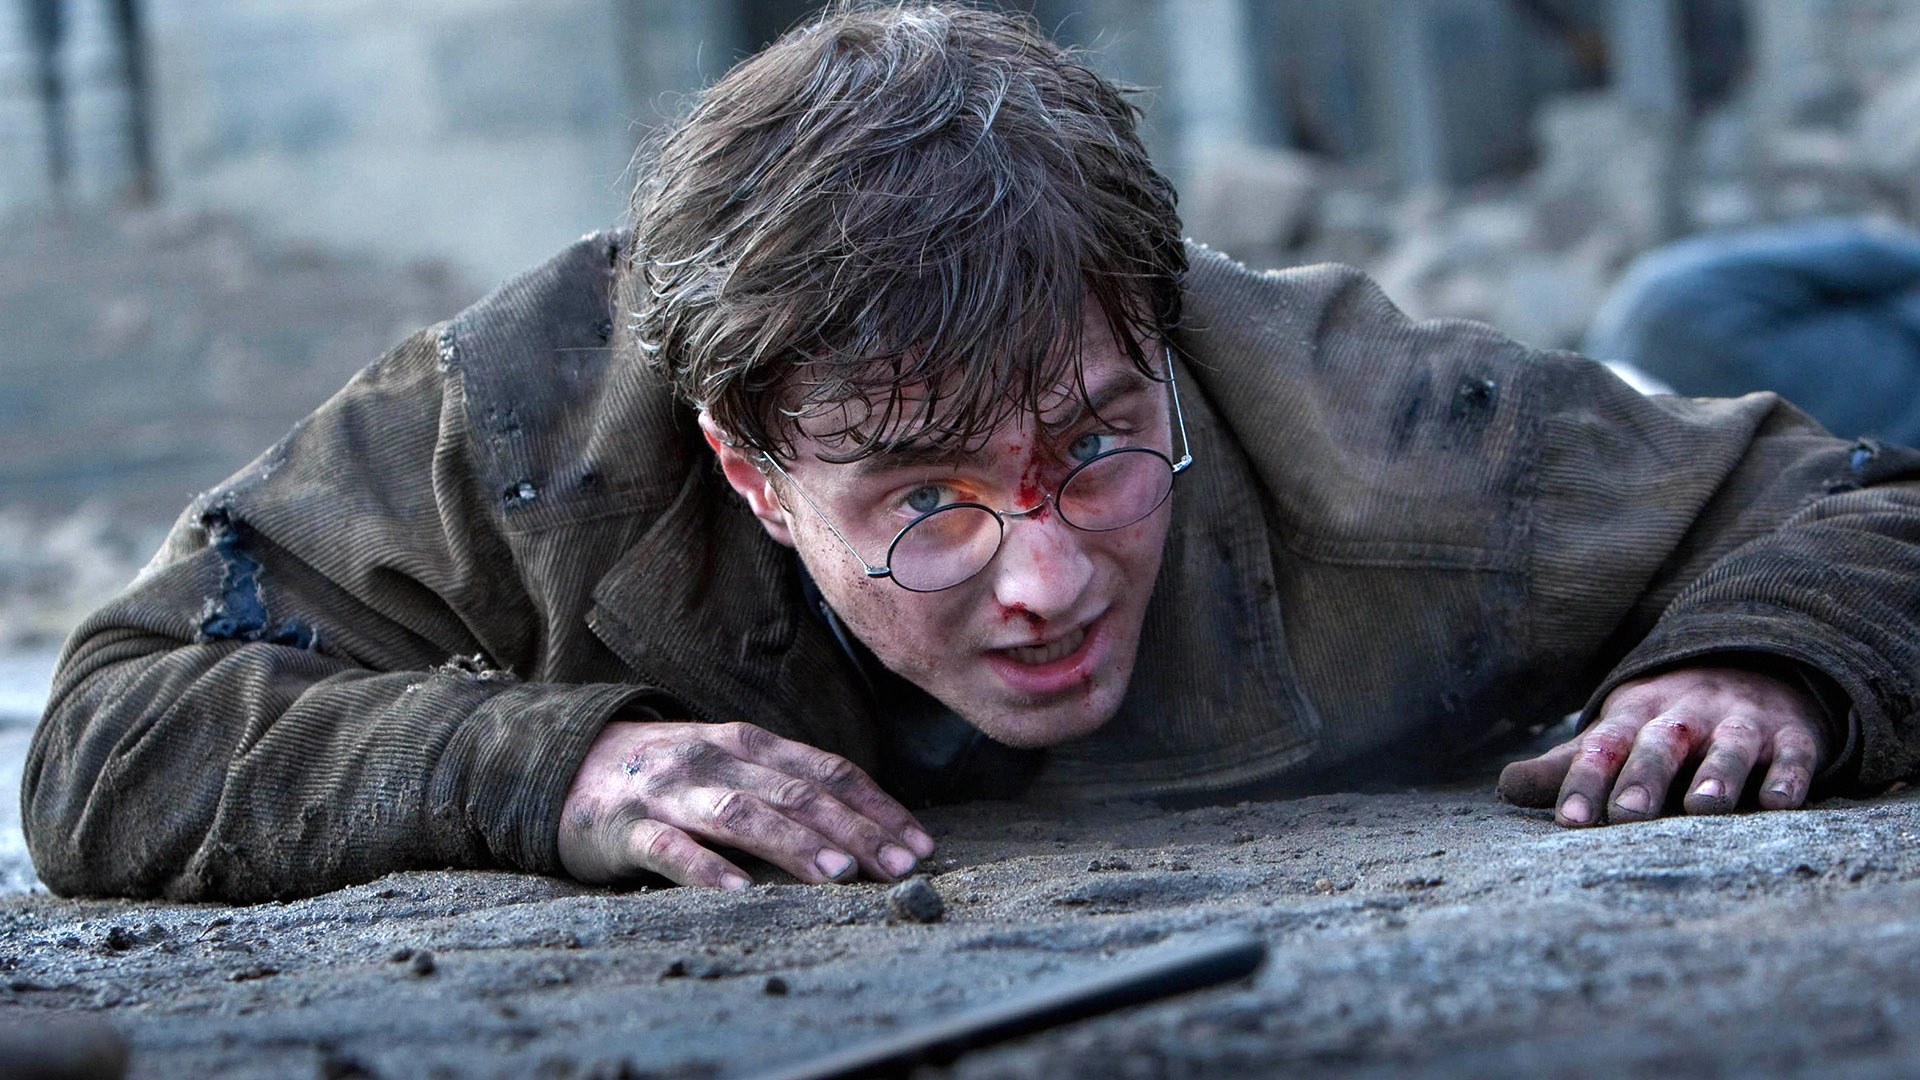 5 Reasons Radcliffe's Cameo in Harry Potter TV Reboot Would Be a Disaster 